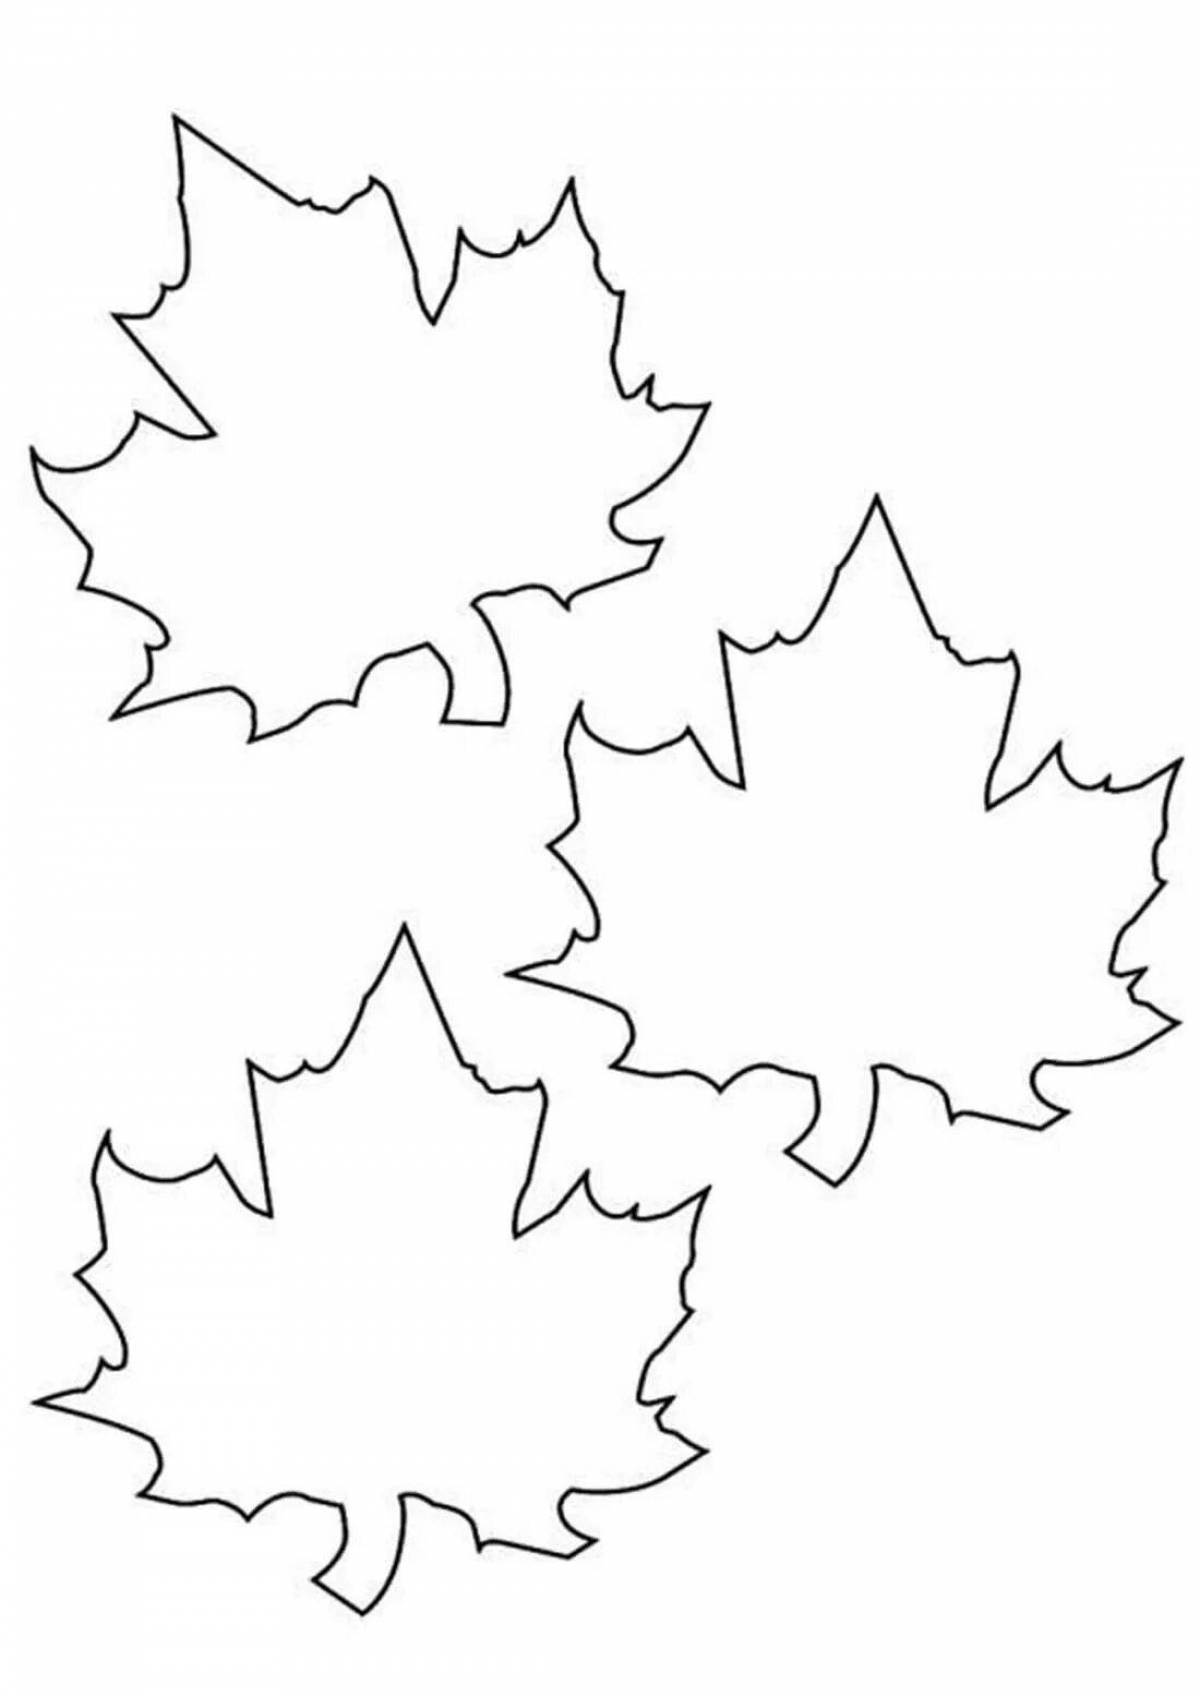 Fun maple leaf coloring for kids